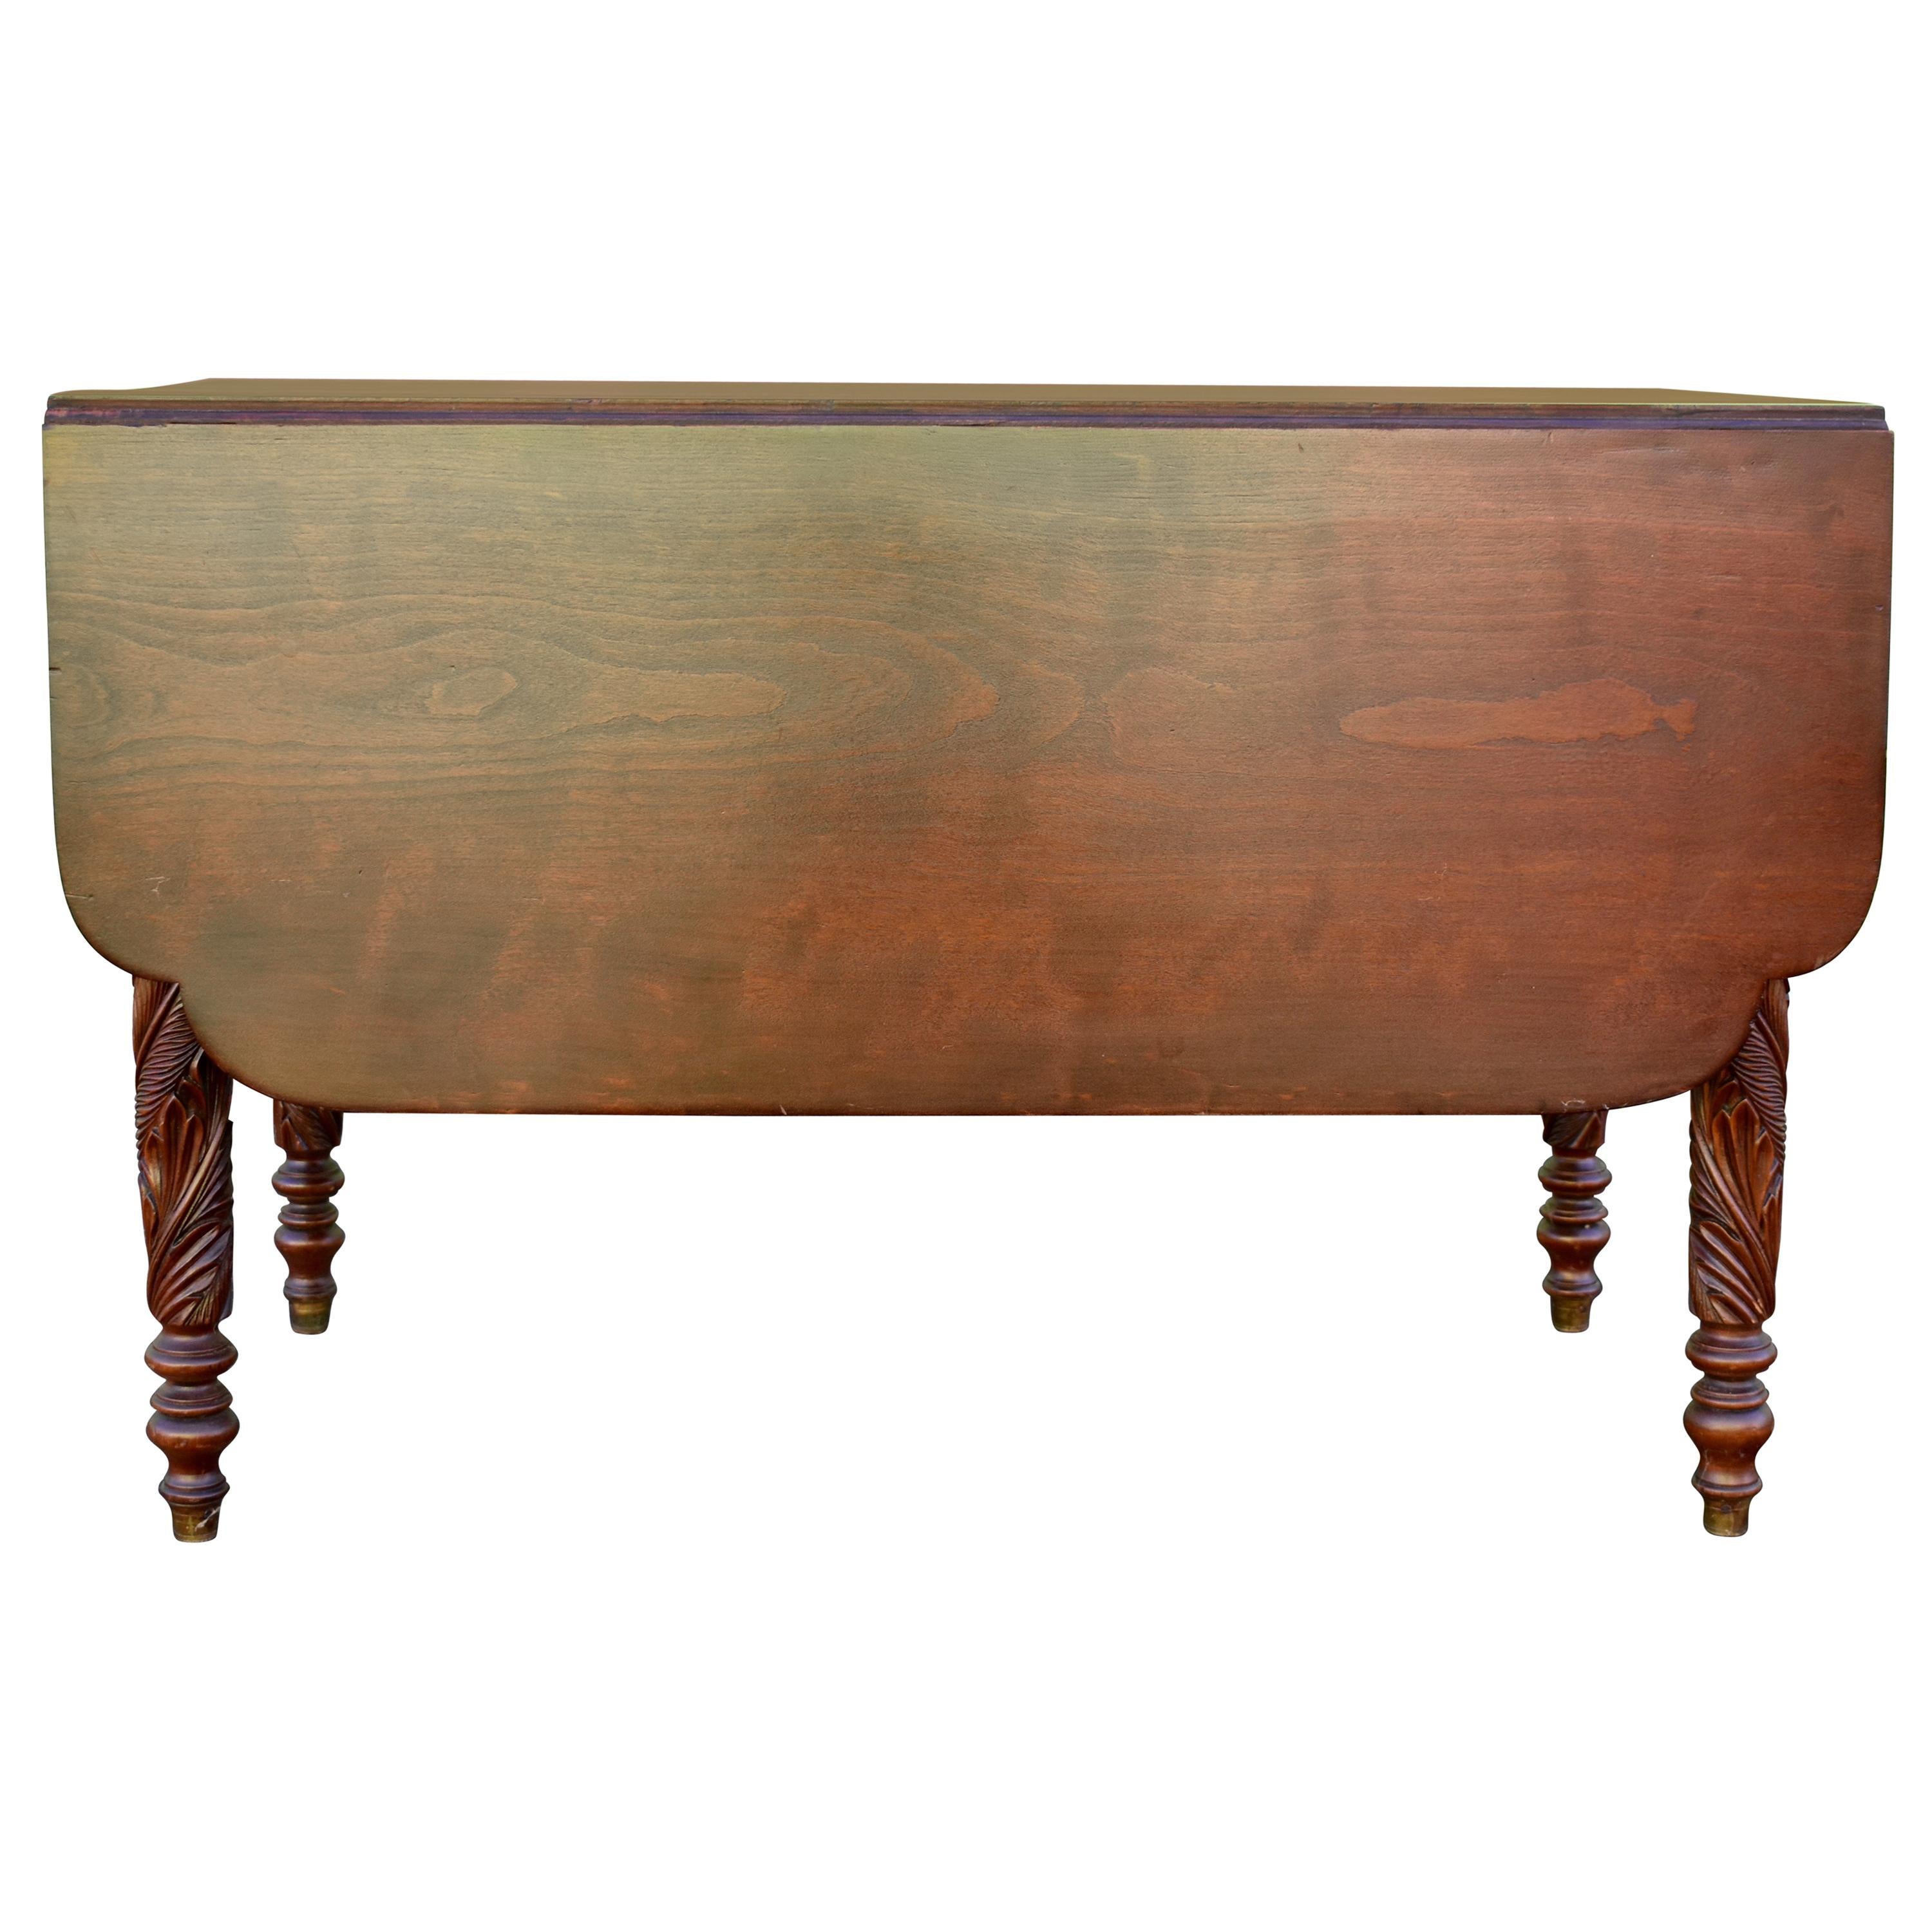 Acanthus Carved Drop Leaf Table, circa 1840 For Sale